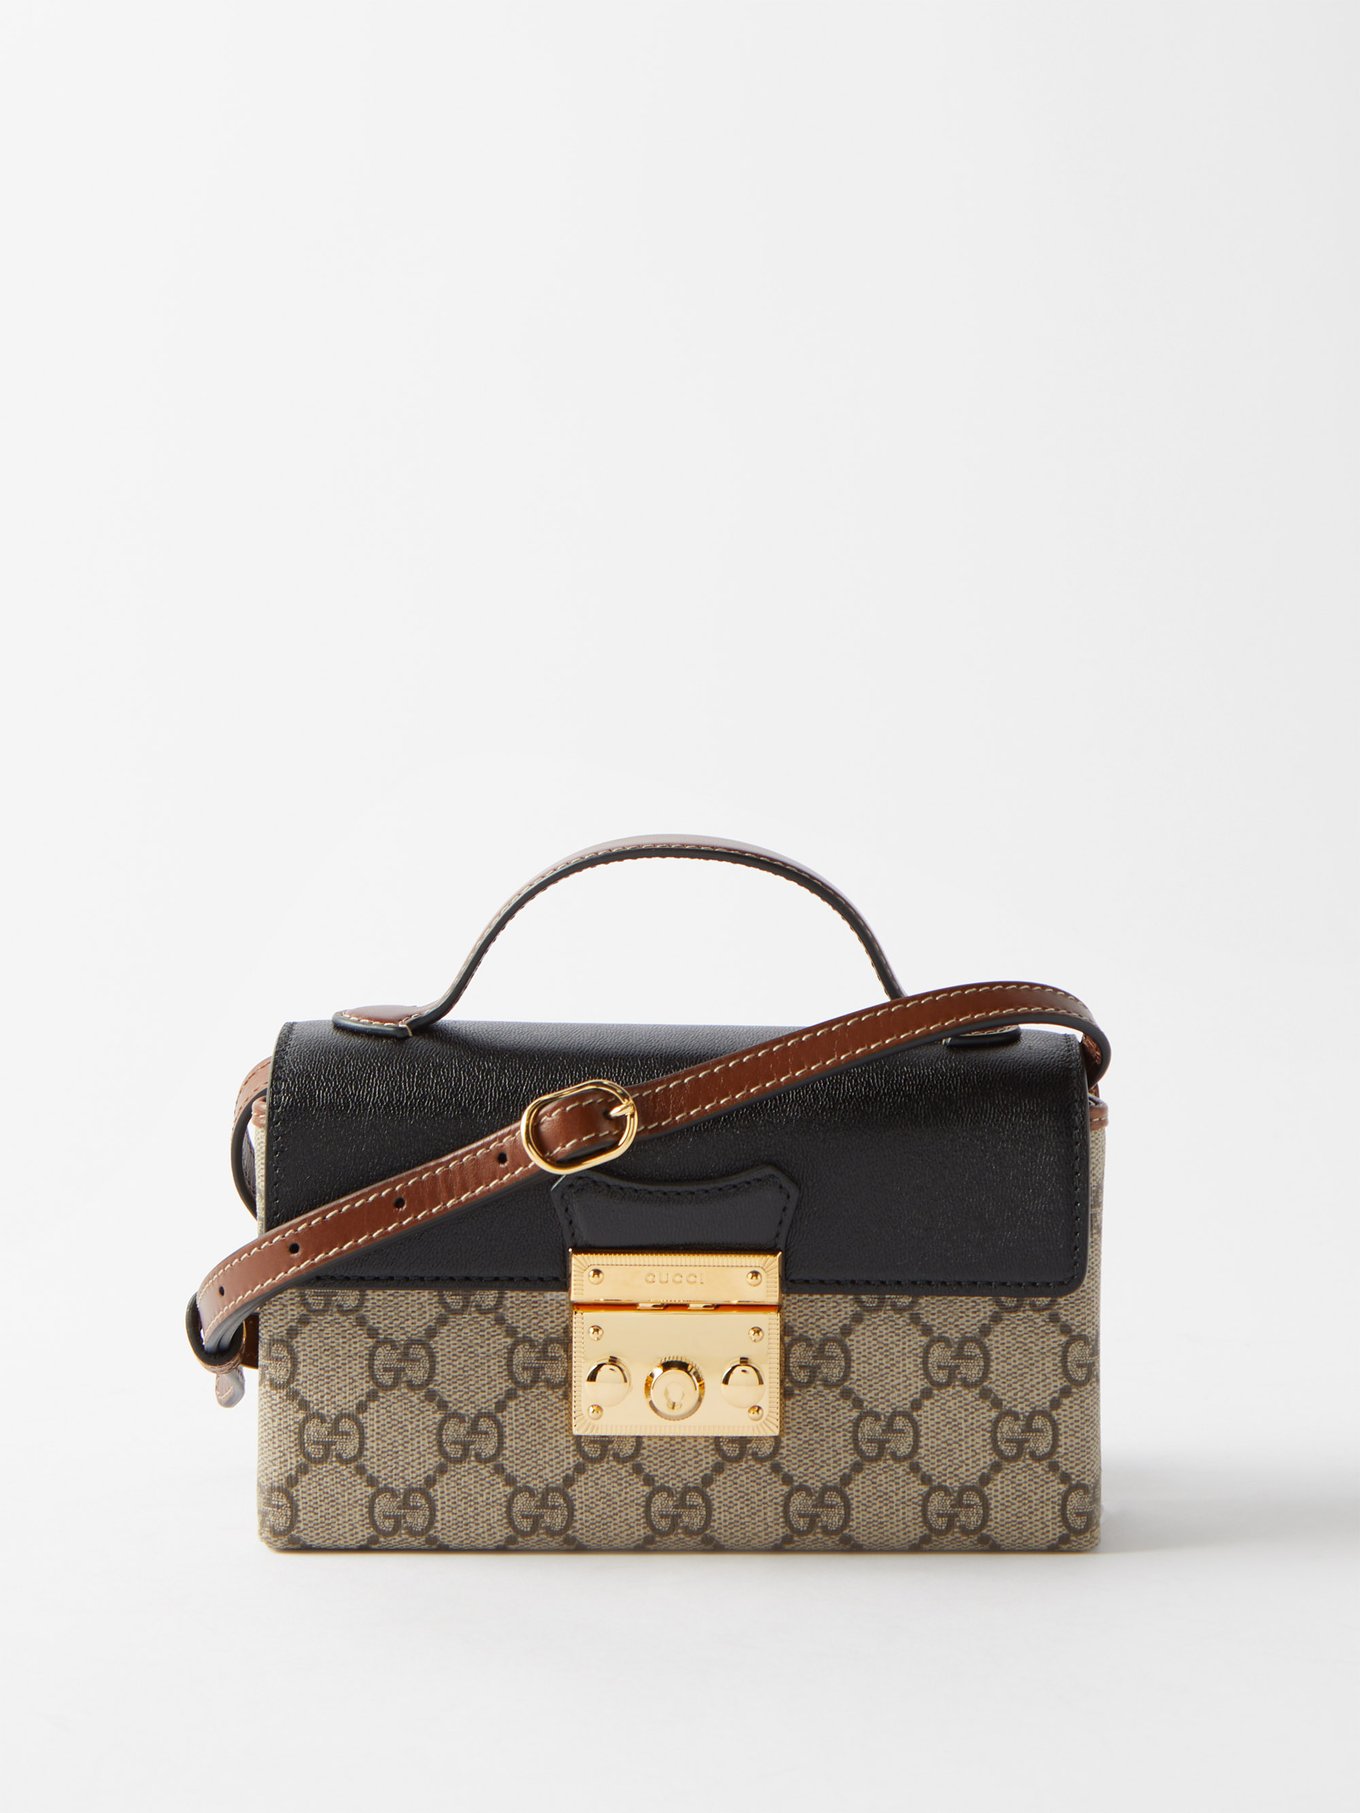 Gucci Handbags, Shop The Largest Collection